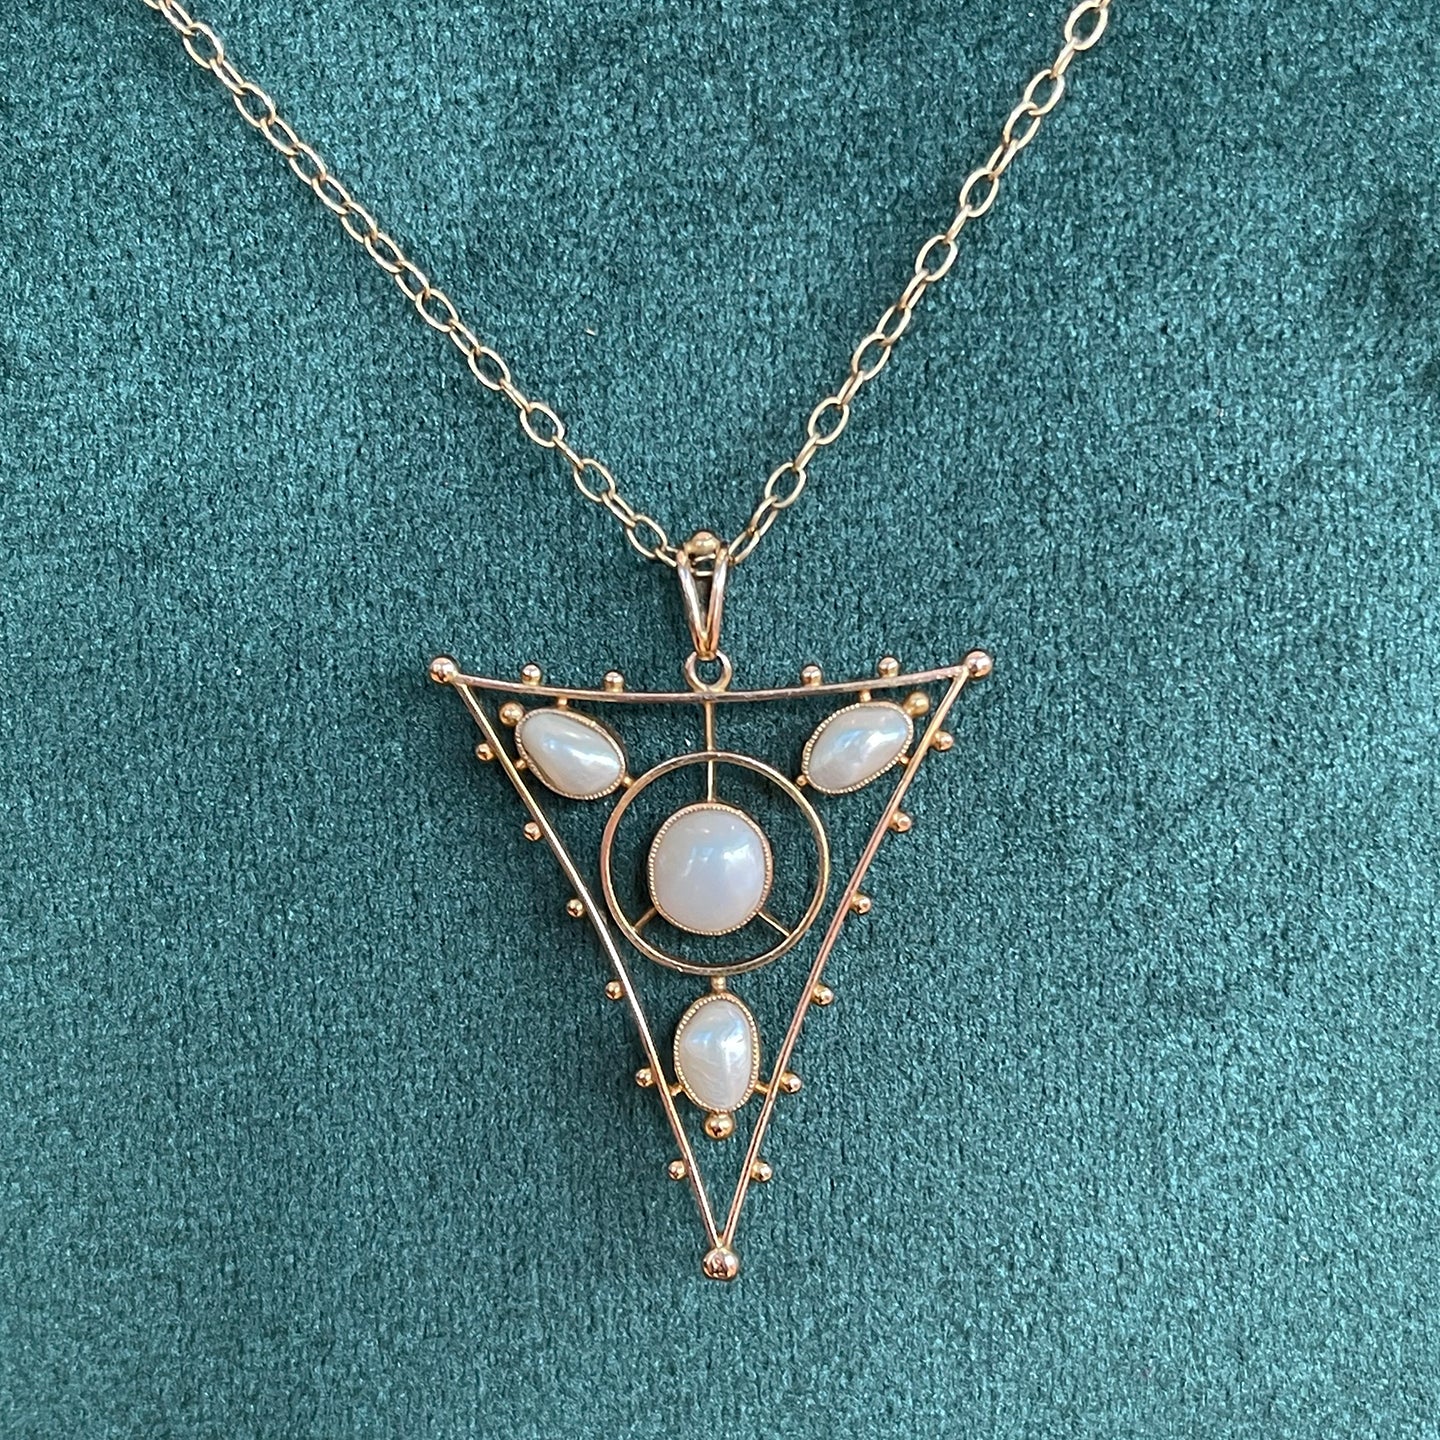 Edwardian Pendant Necklace with Blister Pearls in 9k Gold